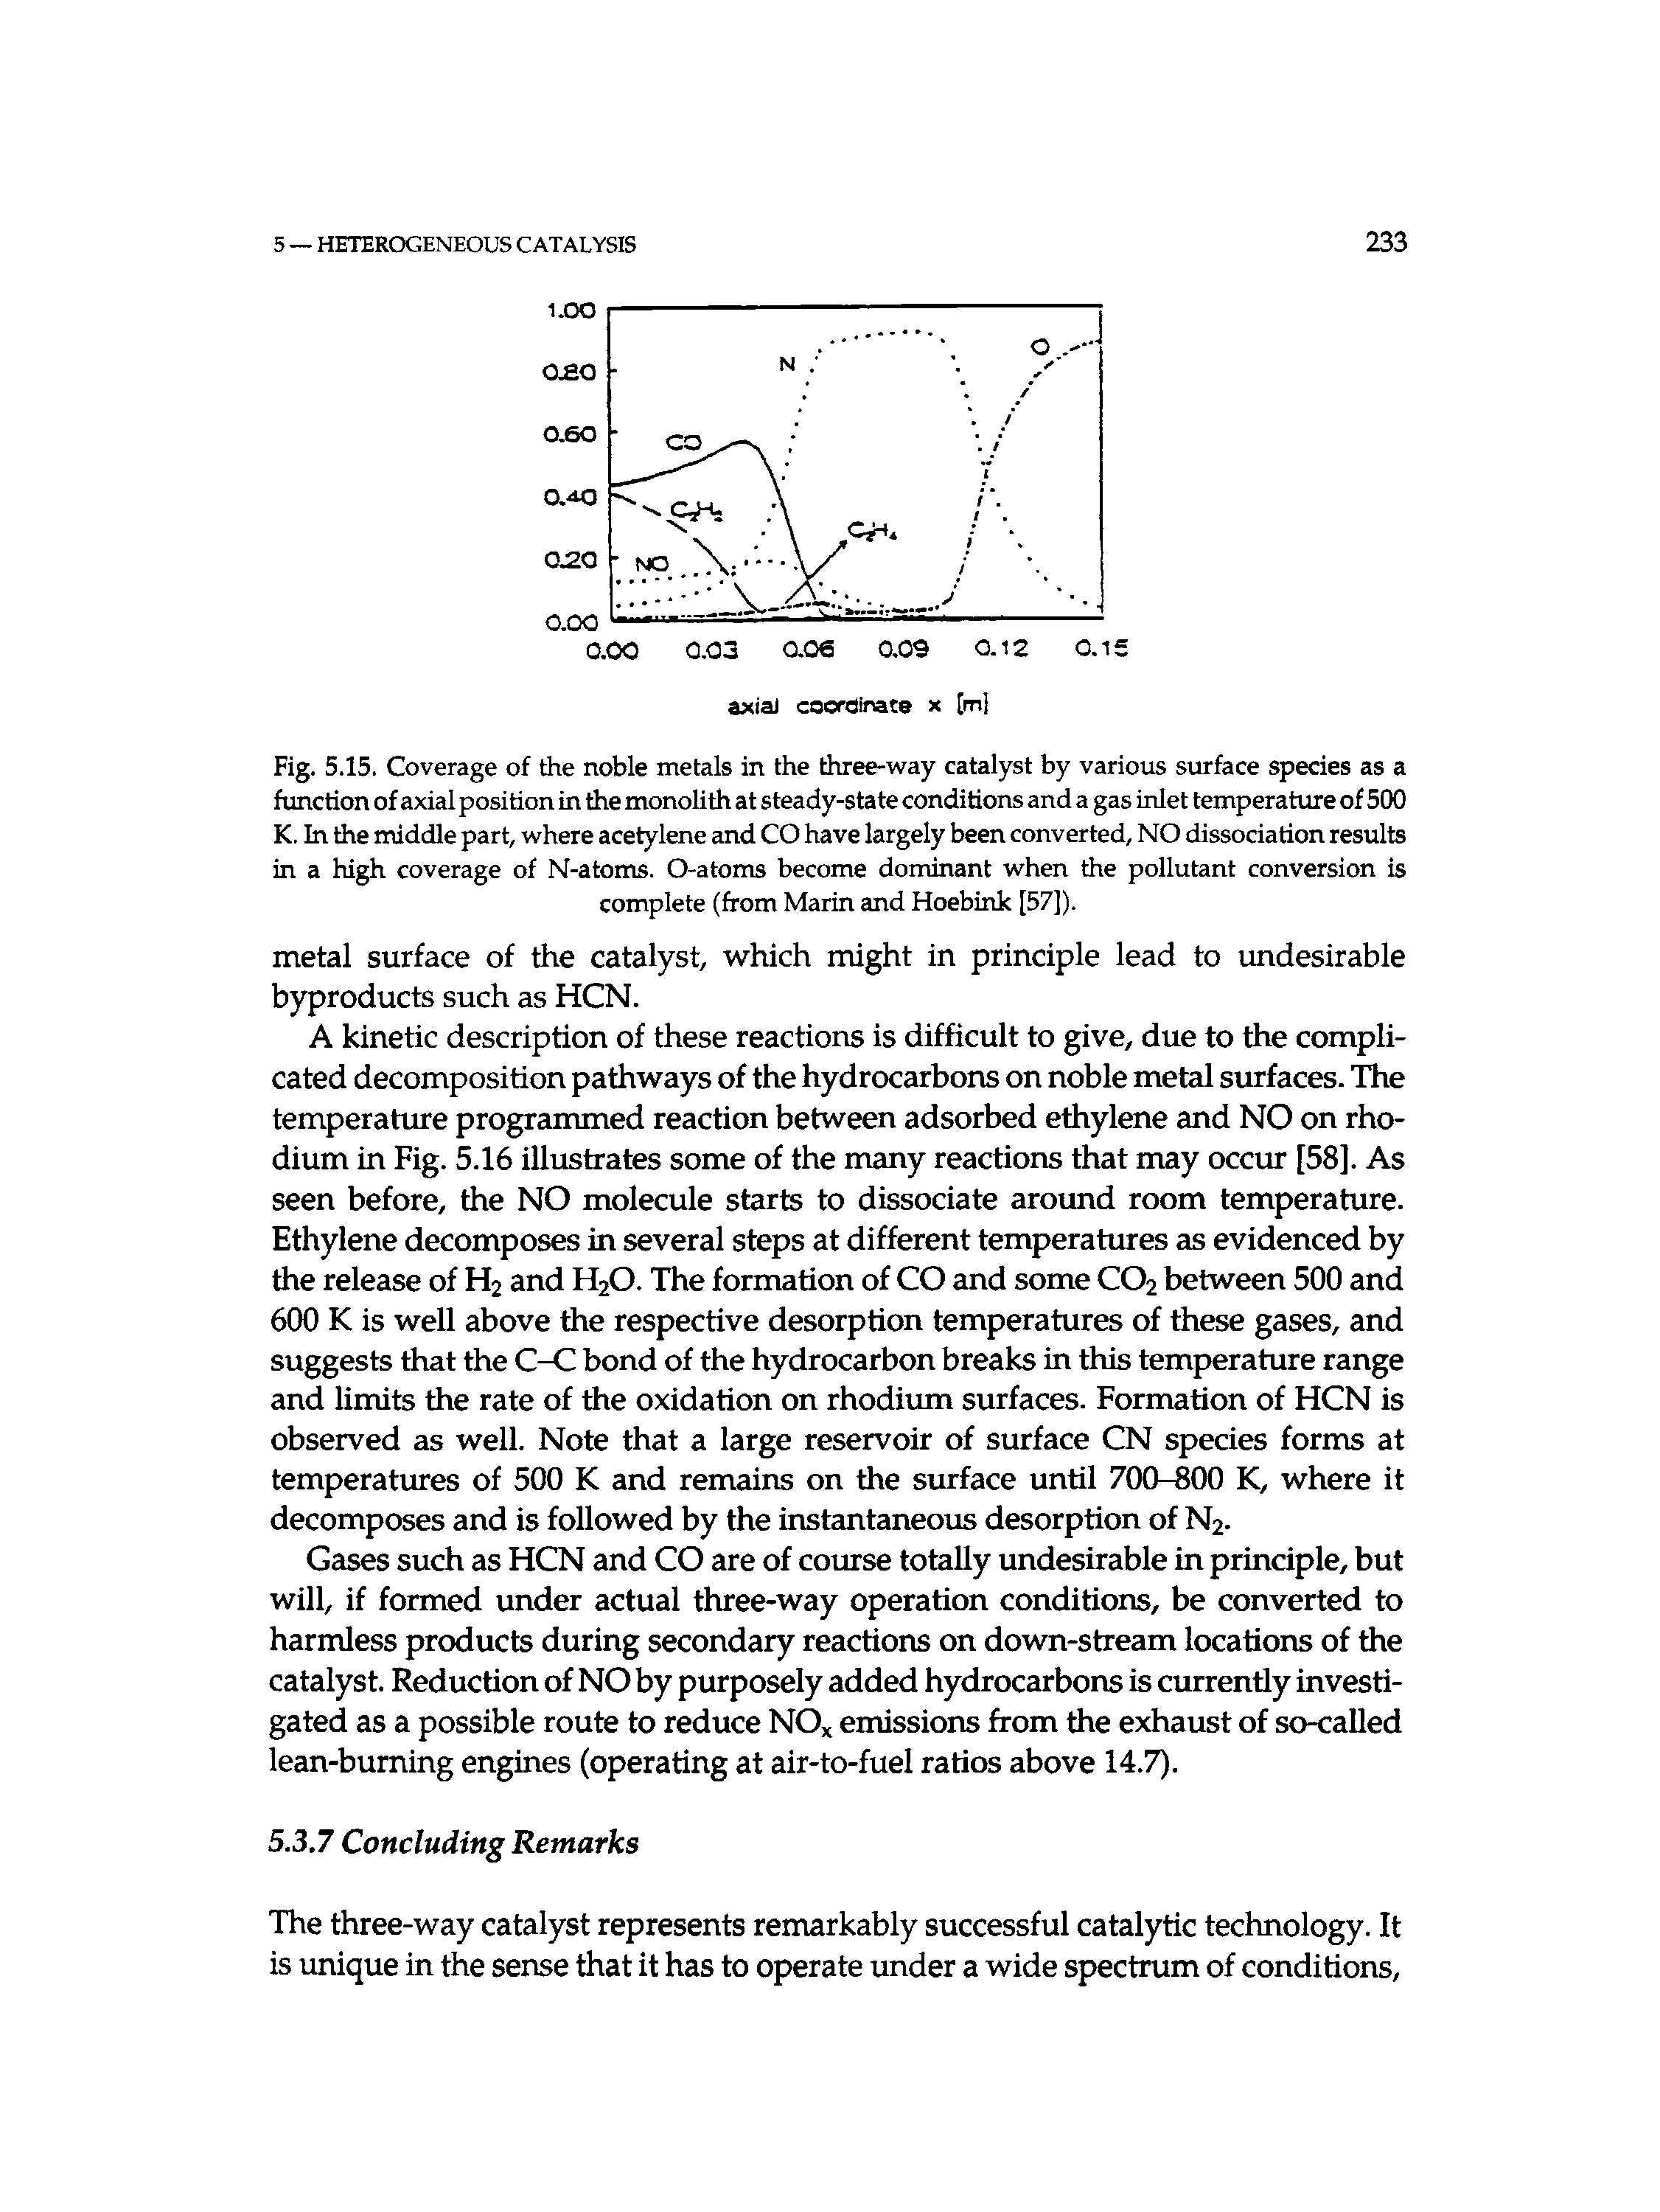 Fig. 5.15. Coverage of the noble metals in the three-way catalyst by various surface species as a function of axial position in the monolith at steady-state conditions and a gas inlet temperature of 500 K. In the middle part, where acetylene and CO have largely been converted, NO dissociation results in a high coverage of N-atoms. O-atoms become dominant when the pollutant conversion is complete (from Marin and Hoebink [57]).